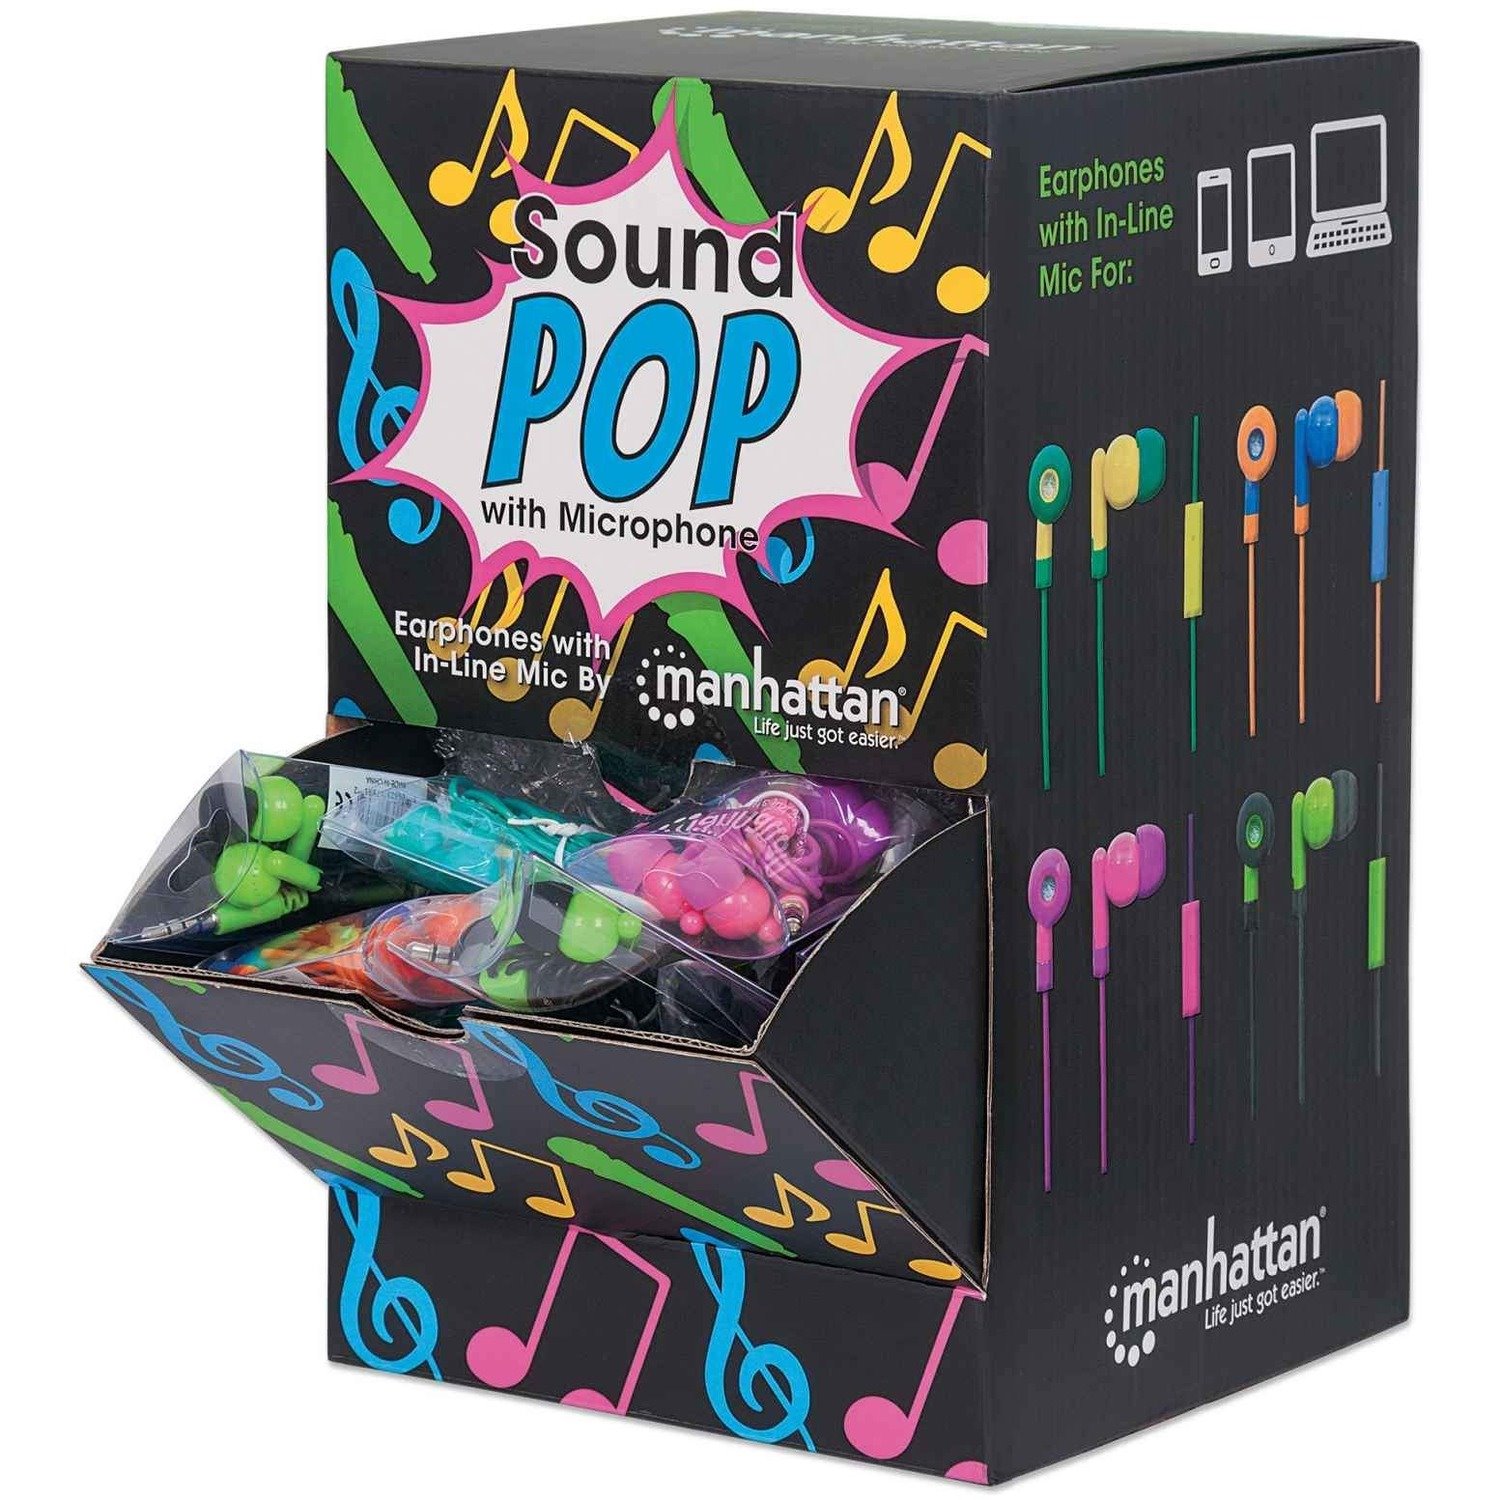 Manhattan x40 Earphones with In-Line Mic, Counter Top Display Pack, x4 colour combinations: Teal/Yellow, Blue/Orange, Pink/Fuschia, Black/Green, 3.5mm Jack, Cable 1m, Cables: Lifetime Warranty